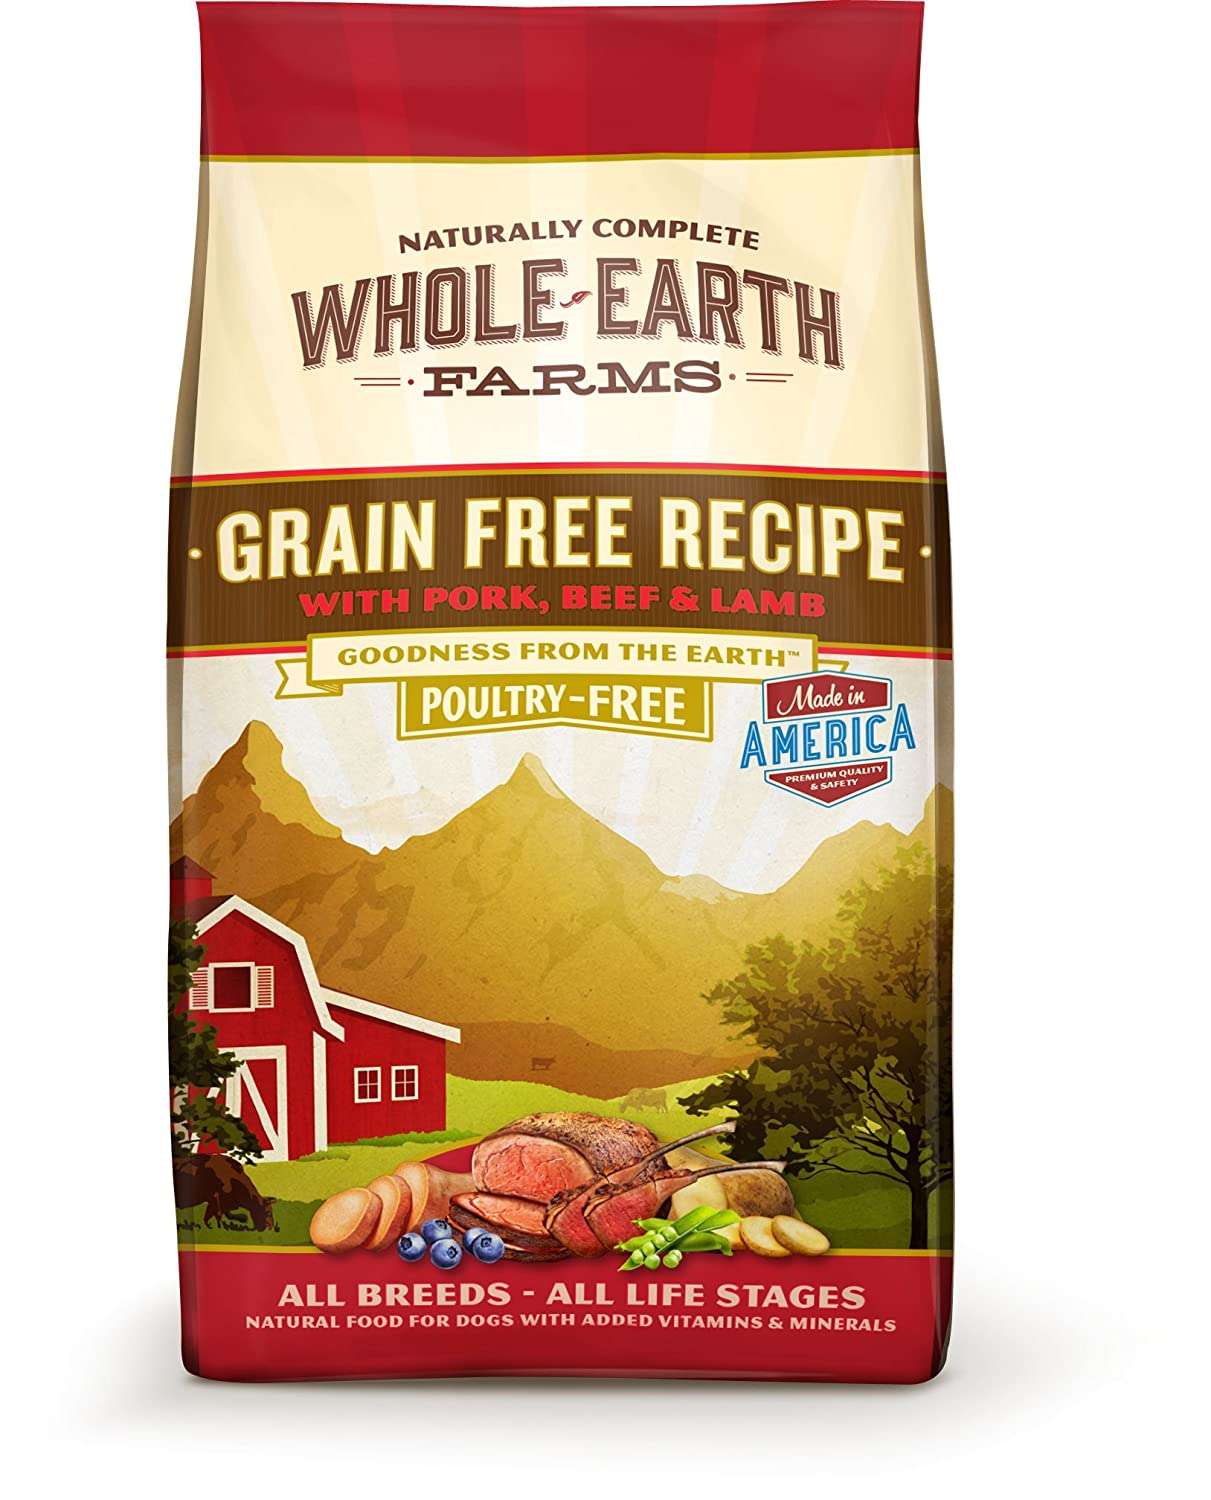 Whole Earth Farms Cat Food Reviews